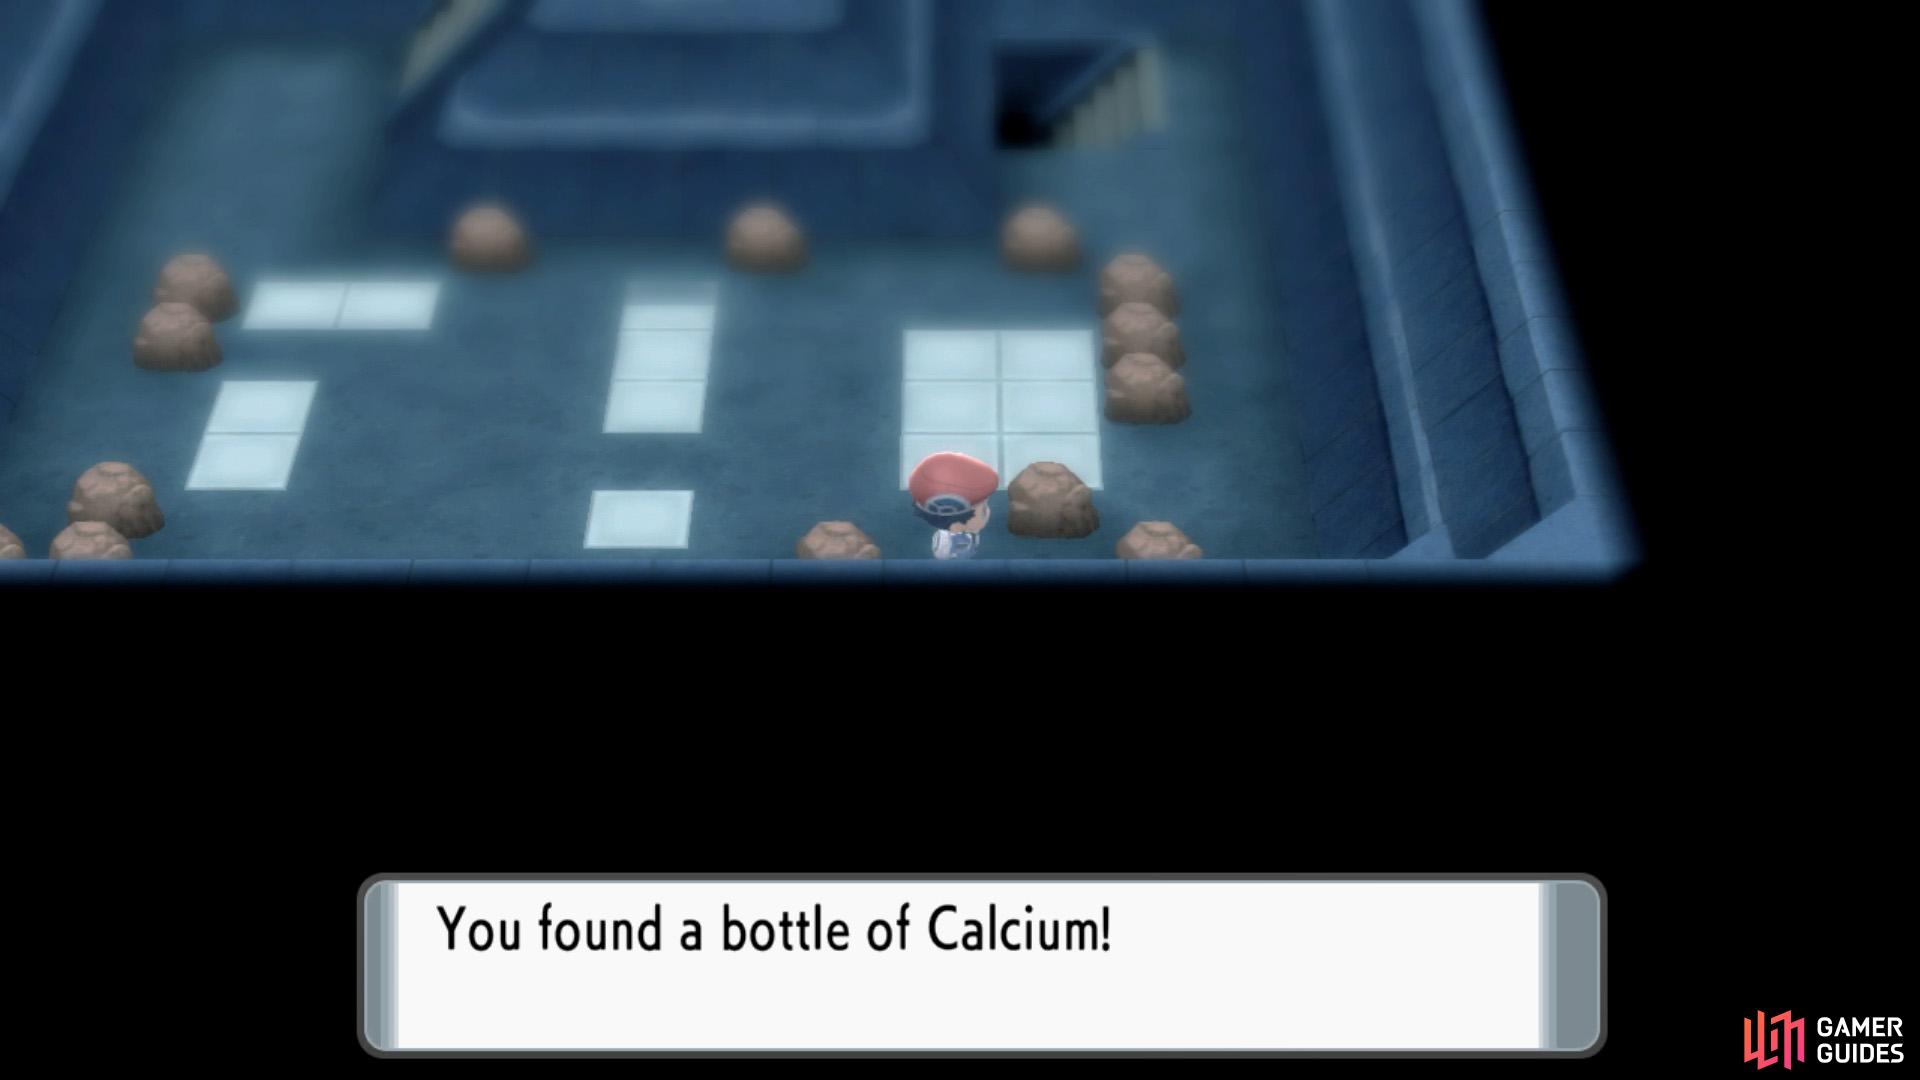 A growing boy/girl like you needs their Calcium. Oh, it’s for Pokémon only?